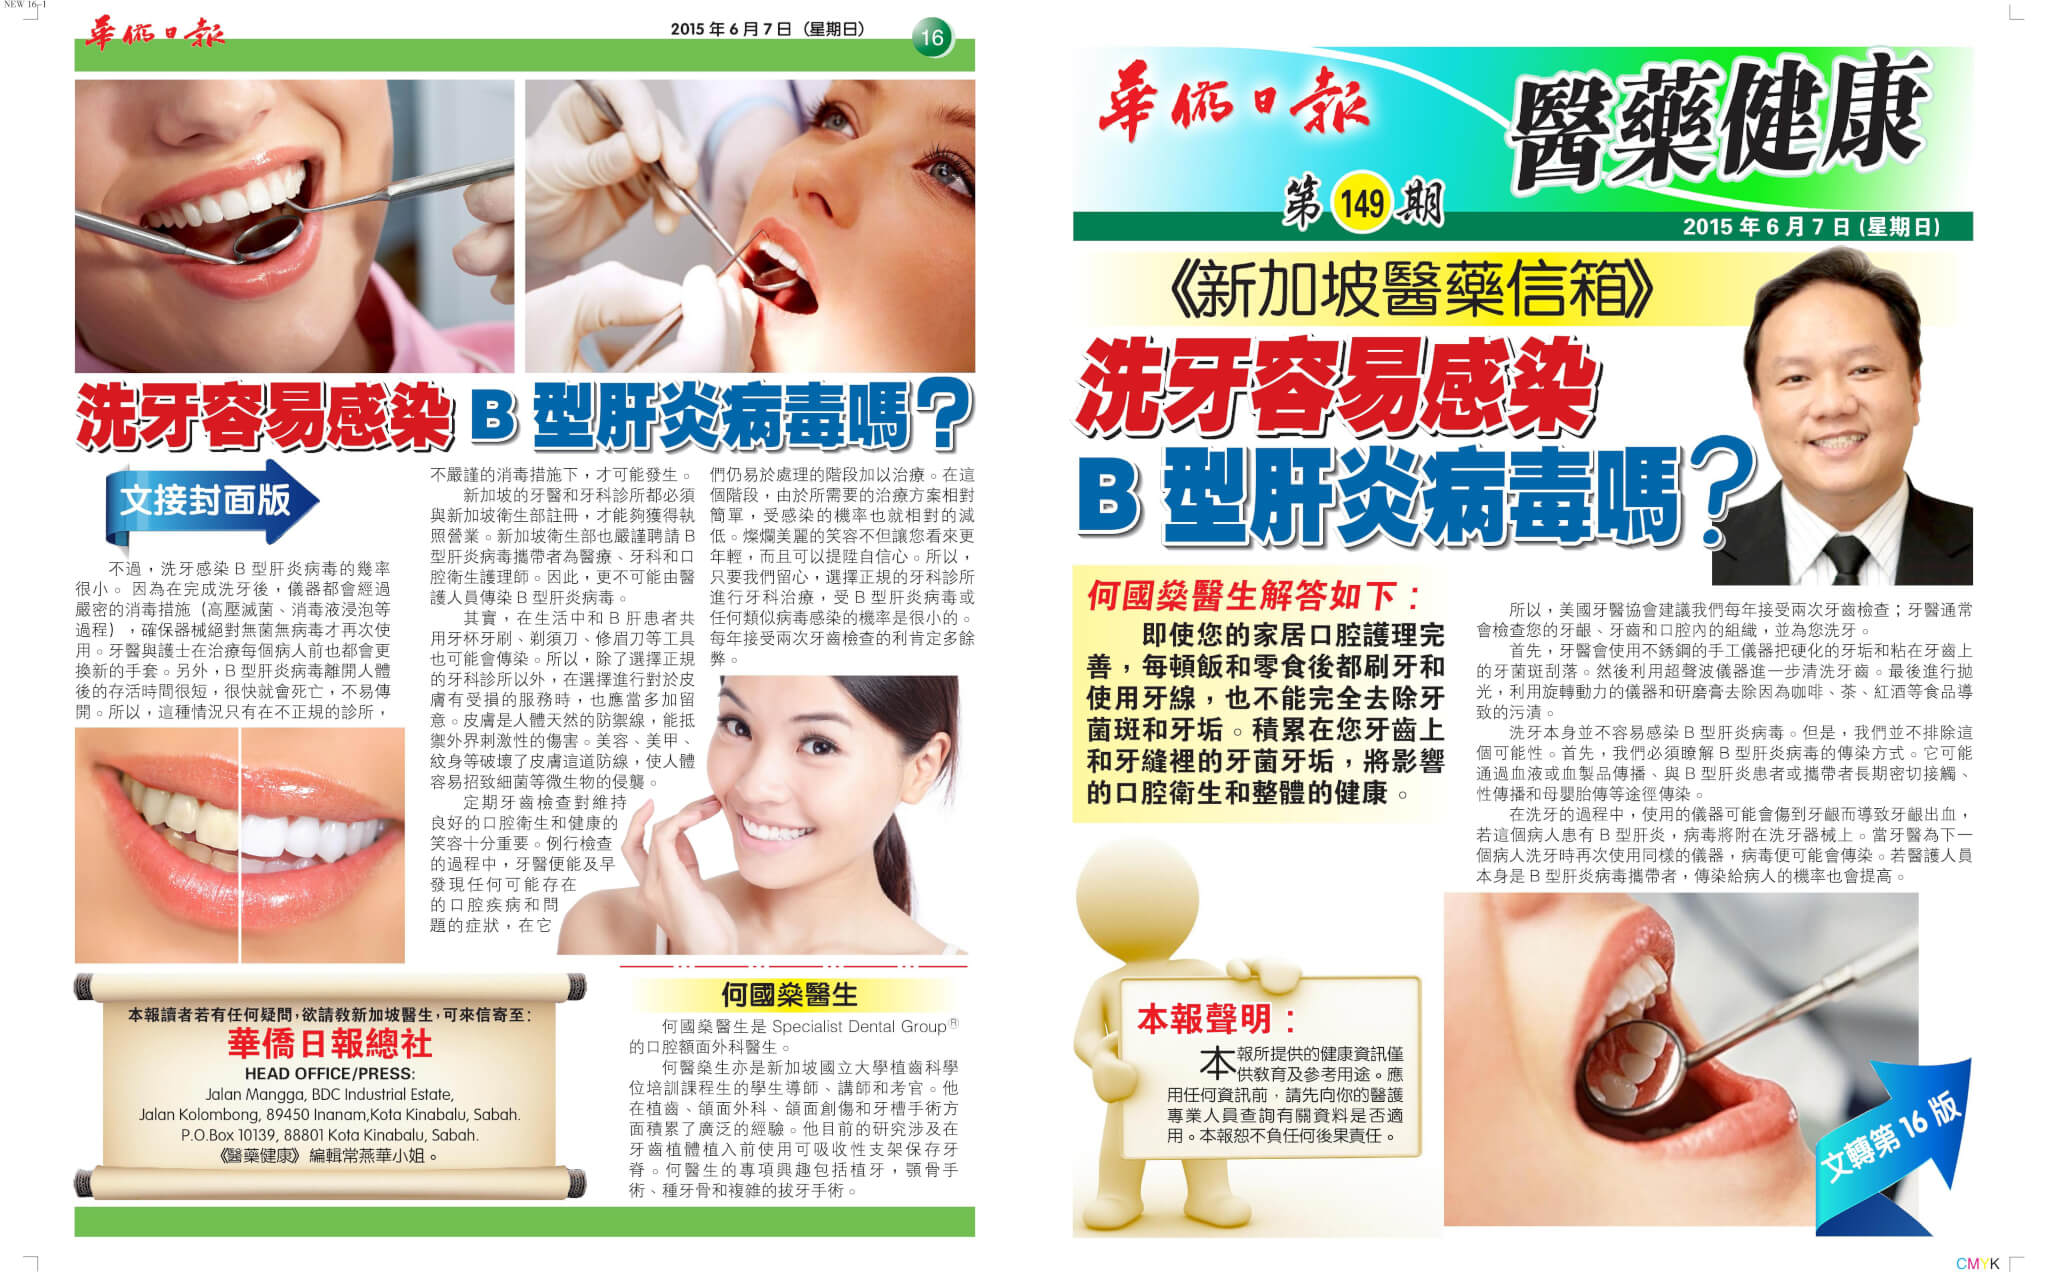 Overseas Chinese Daily News, 7 June 2015: Would I be infected with Hepatitis B virus if I visit the dentist for scaling and polishing?